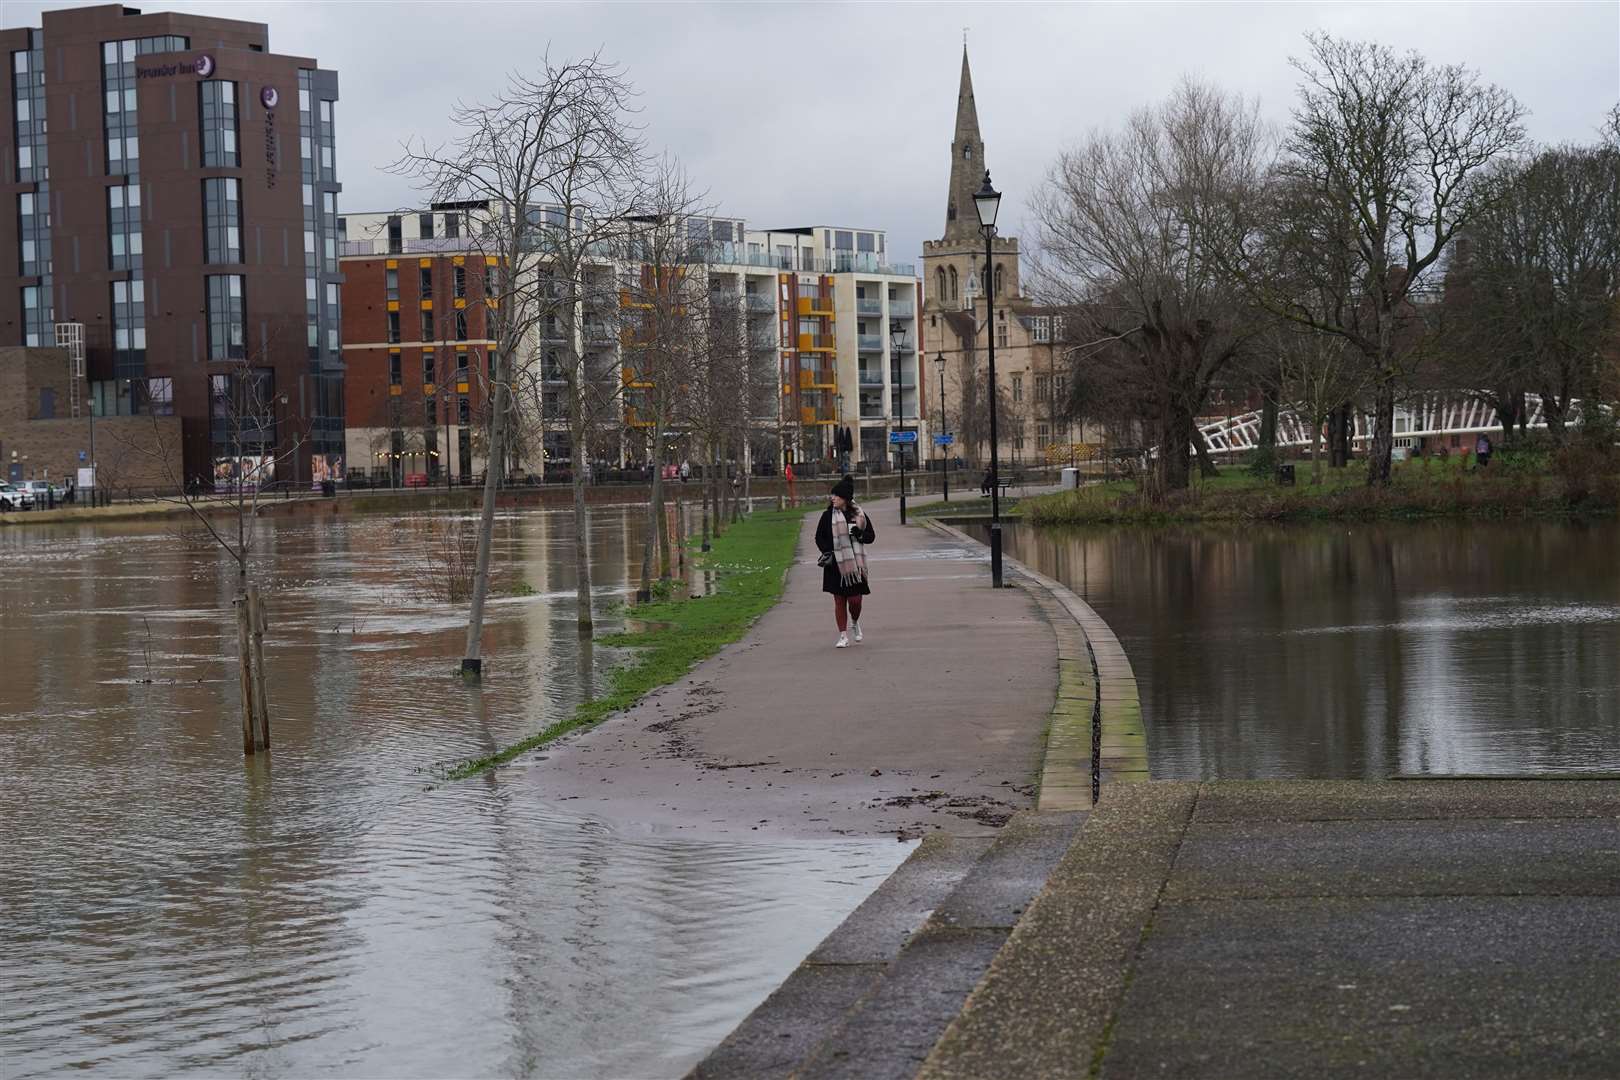 The River Great Ouse in Bedford town centre, which has burst its banks following heavy rainfall (Stefan Rousseau/PA)